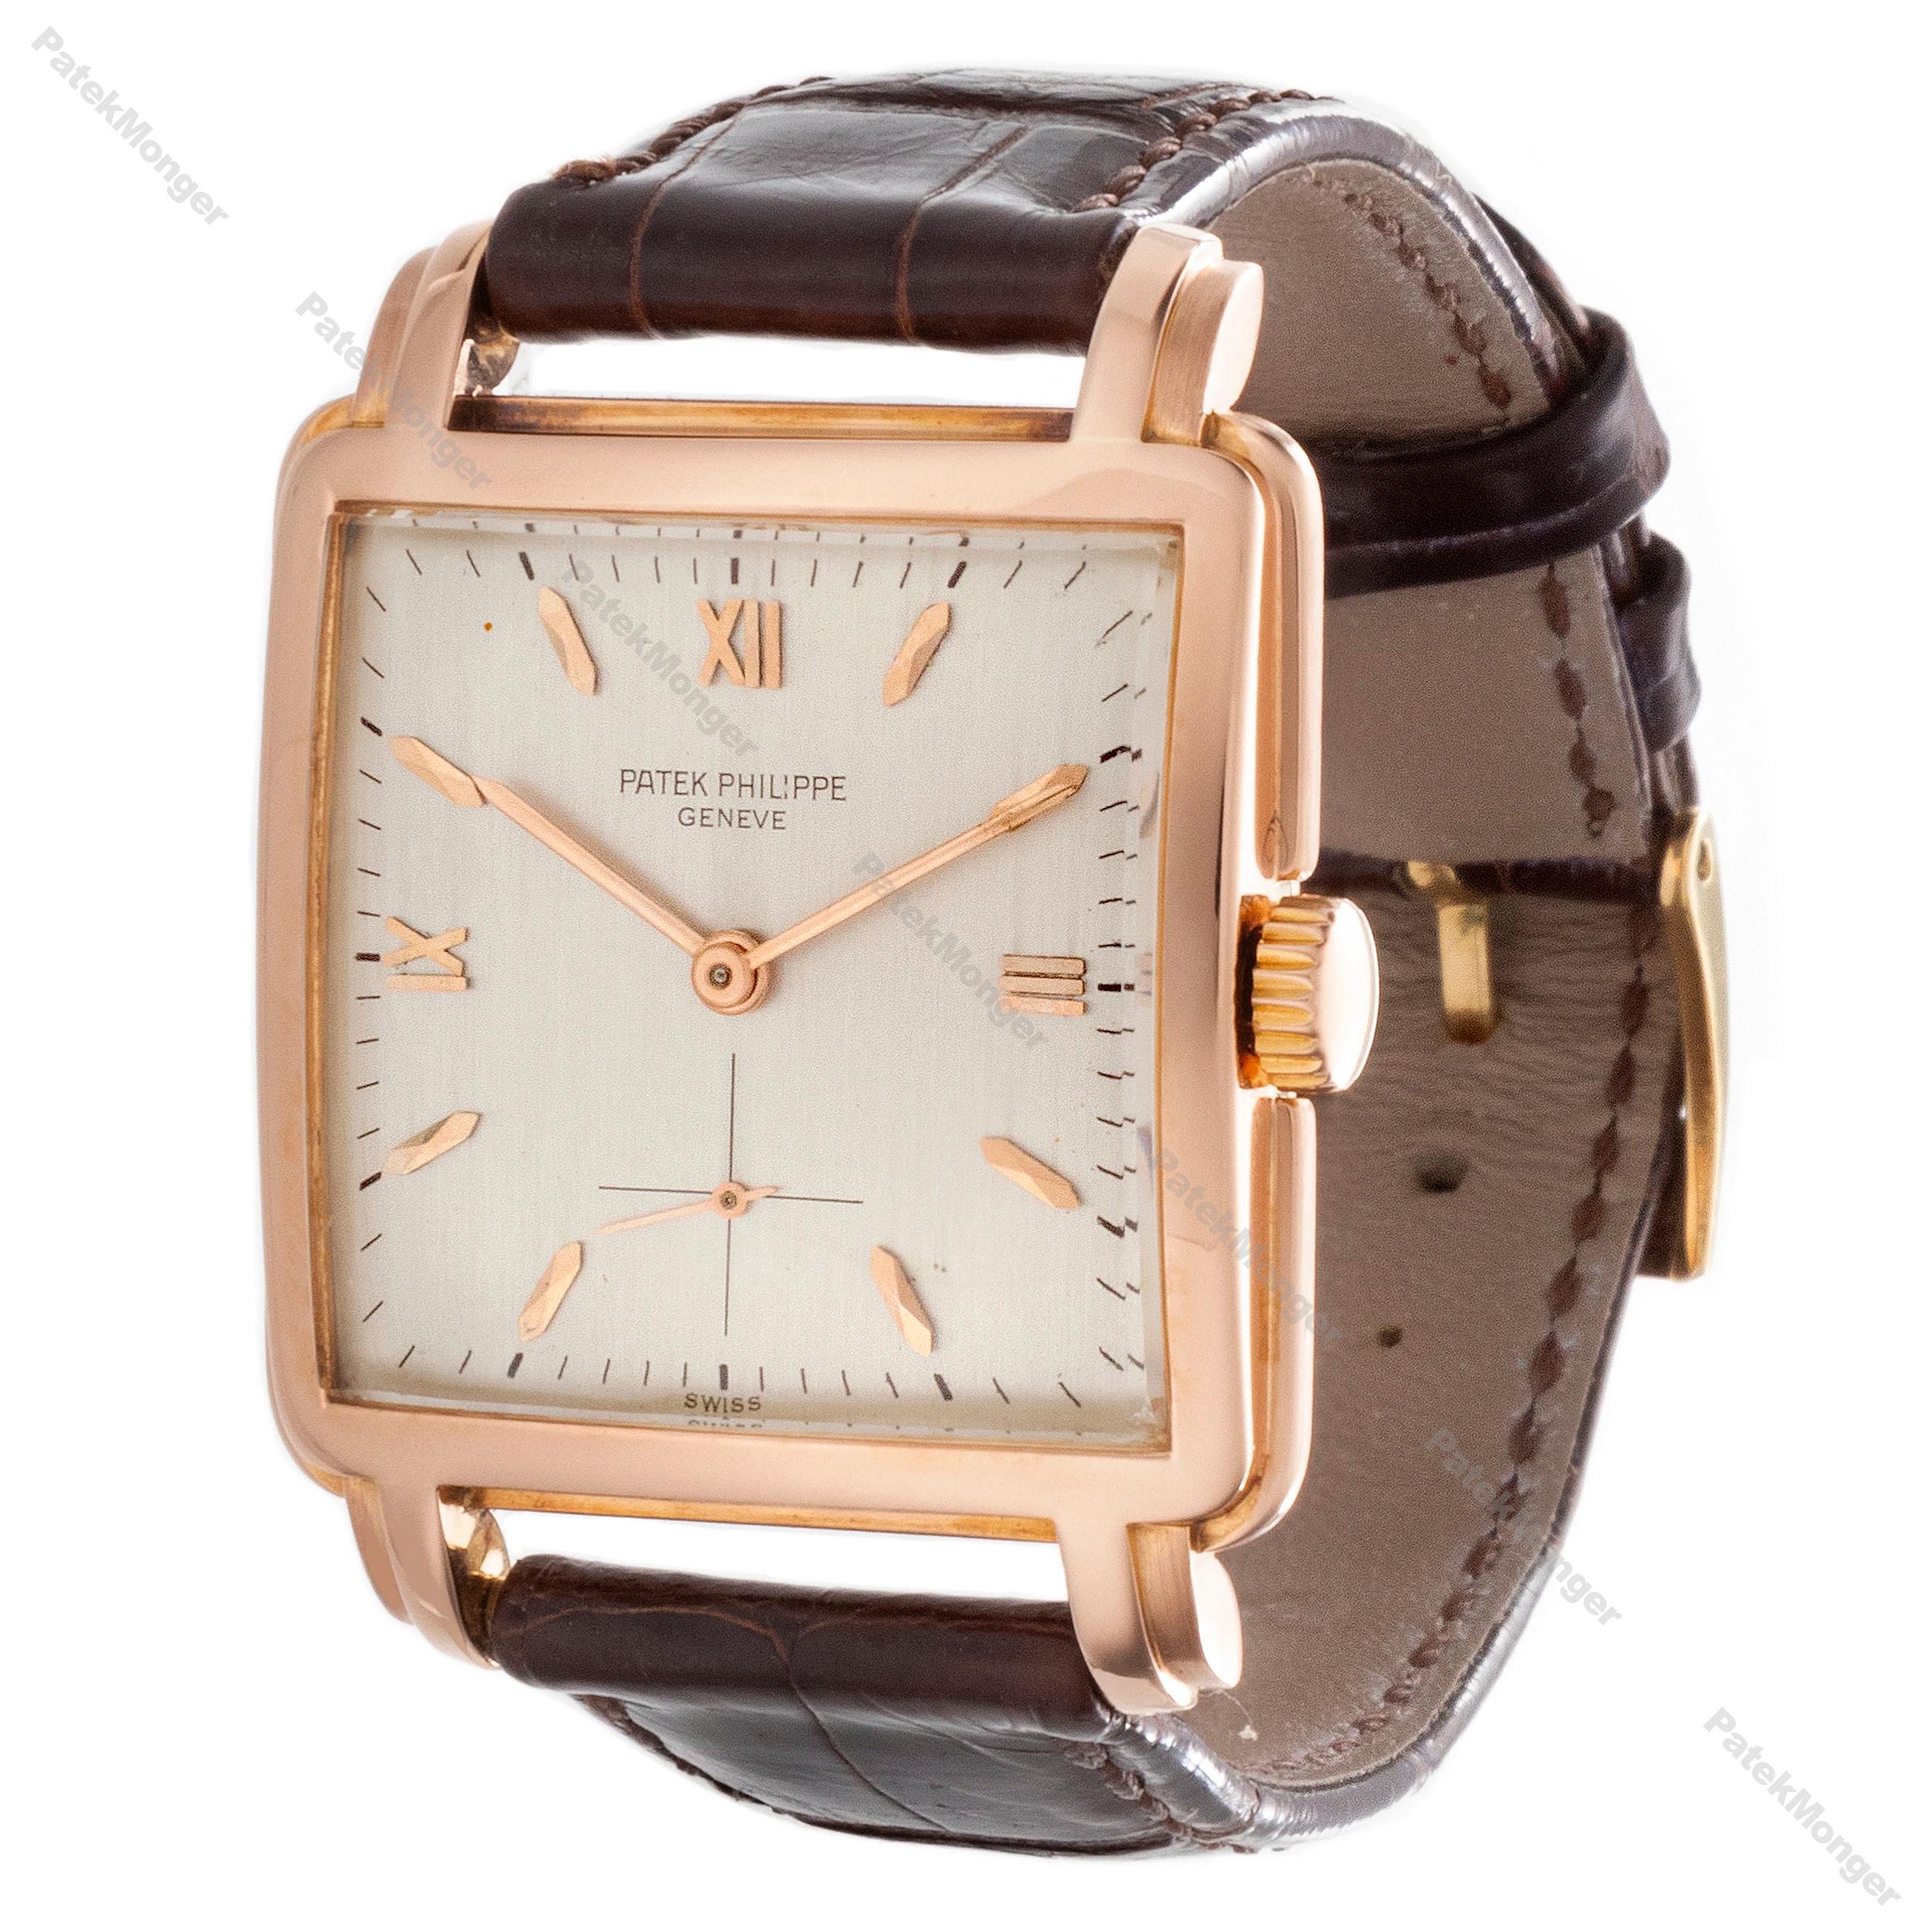 Introduction:
This Patek Philippe 2436R square watch features a 18K rose gold large square 40 x 30 mm case with a step bezel and large fancy lugs. It is fitted with a 10